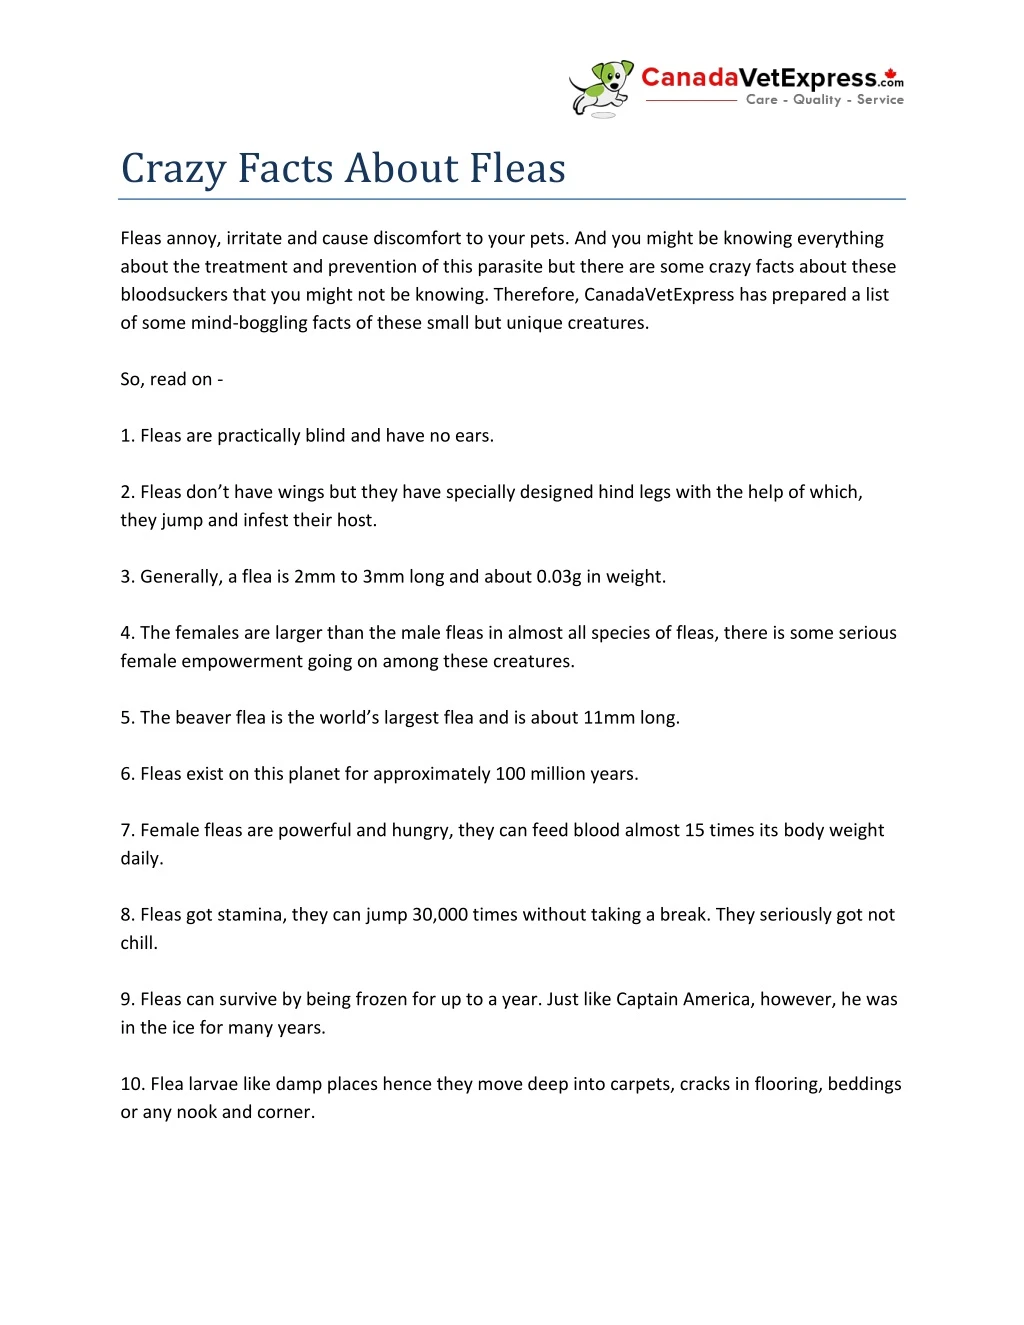 crazy facts about fleas